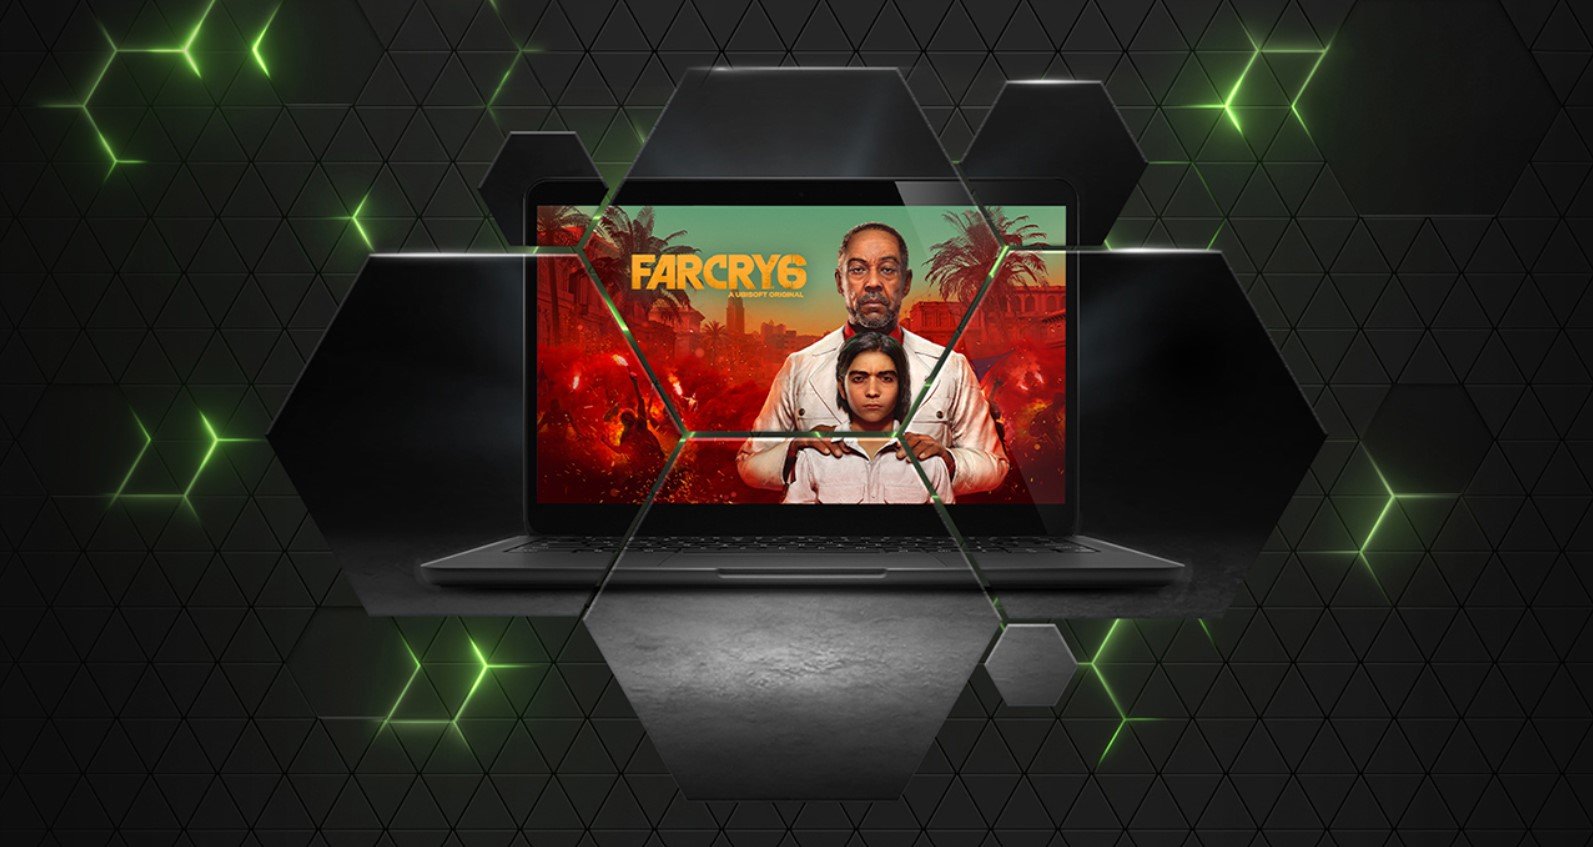 NVIDIA GeForce NOW FarCry 6